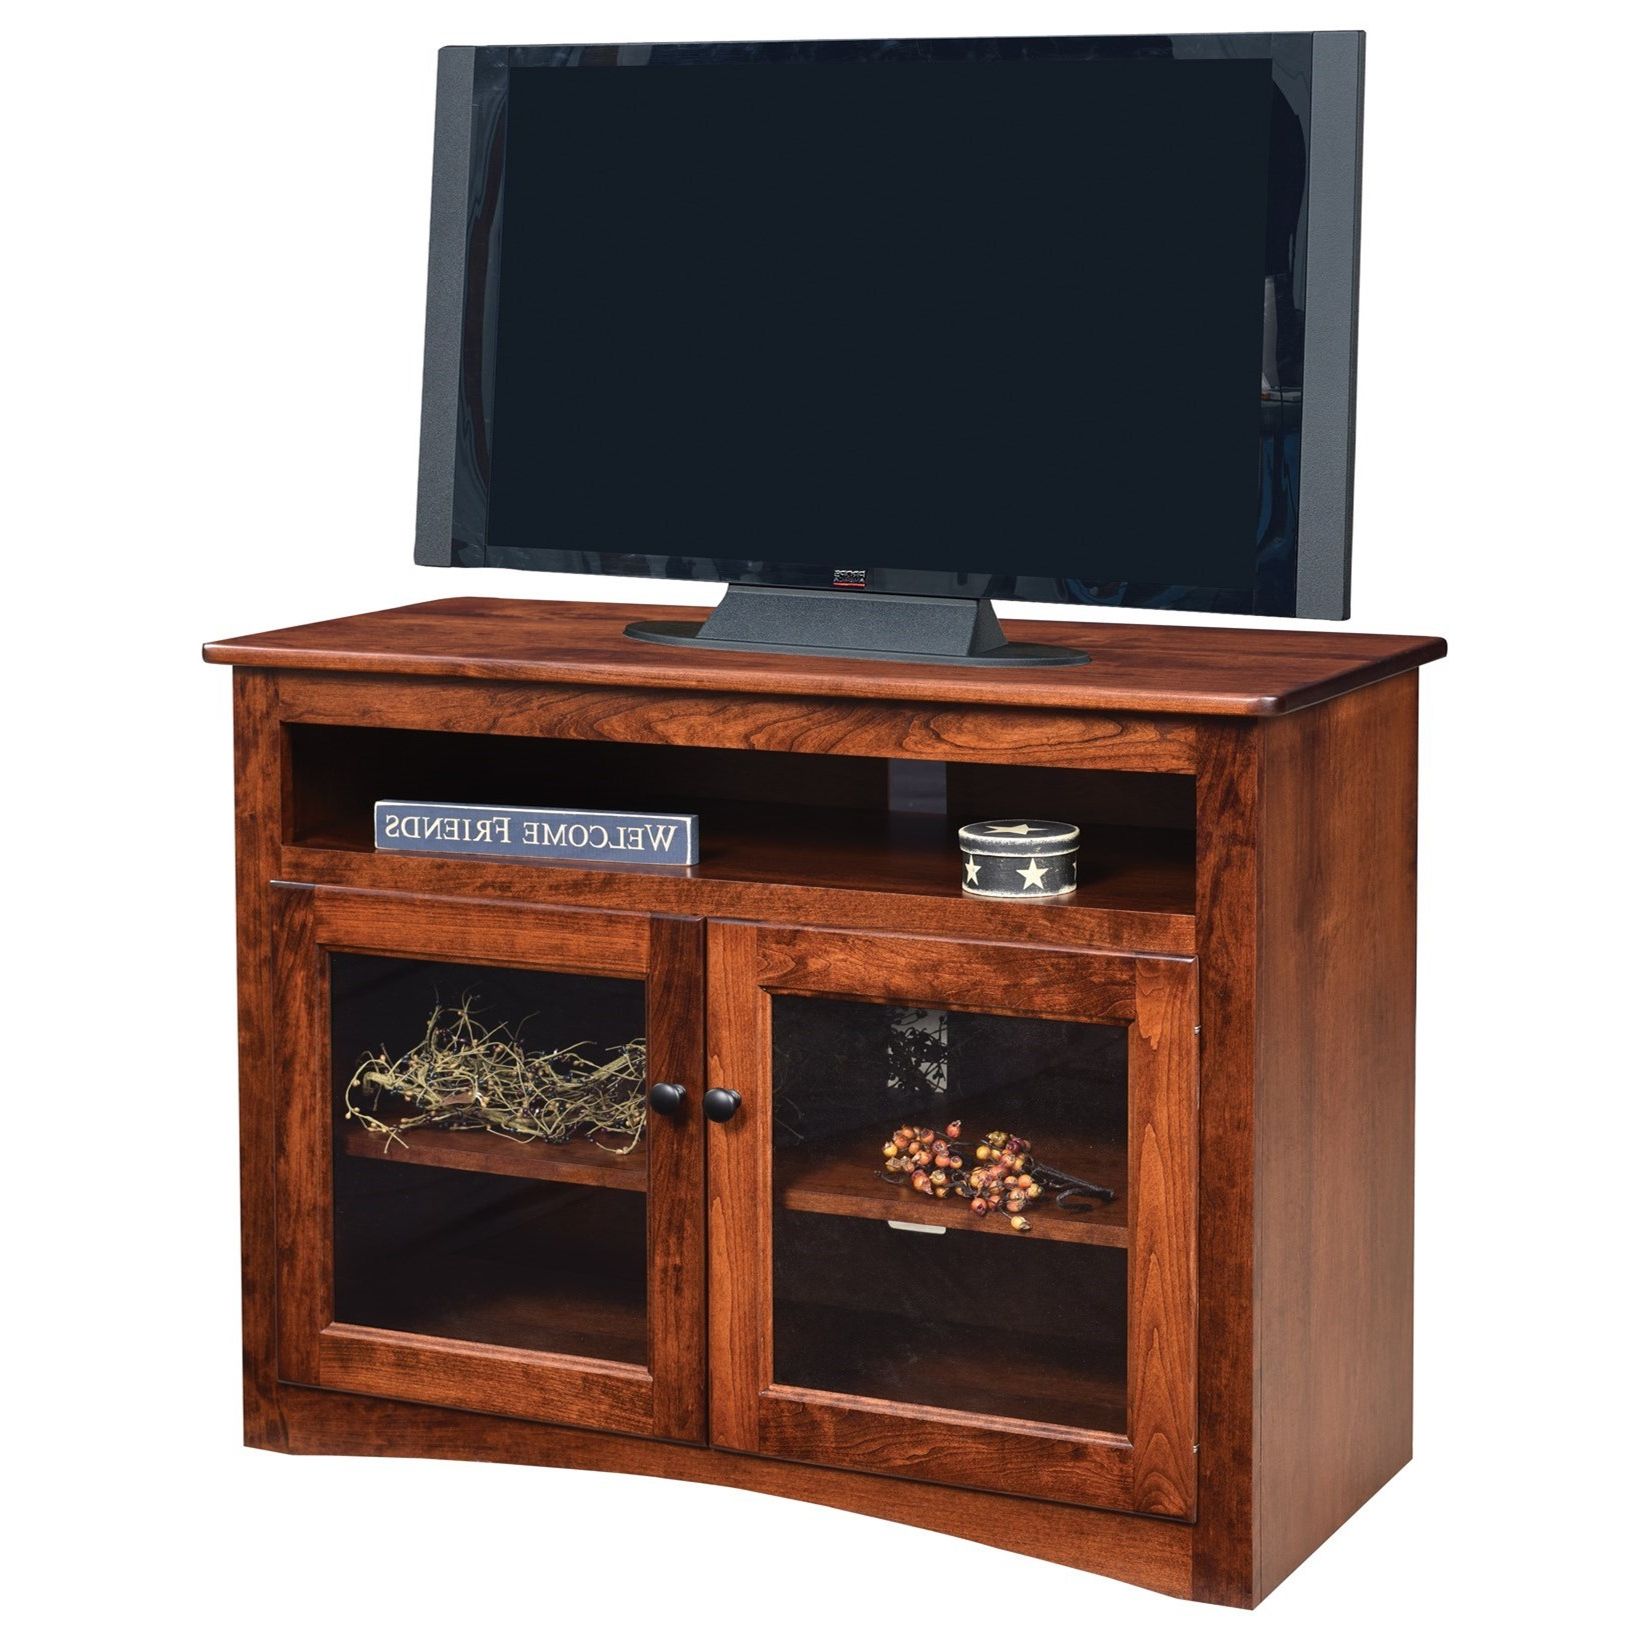 Ashery Oak Economy 40" Customizable Solid Wood Tv Stand In Modern Tv Stands In Oak Wood And Black Accents With Storage Doors (Gallery 2 of 20)